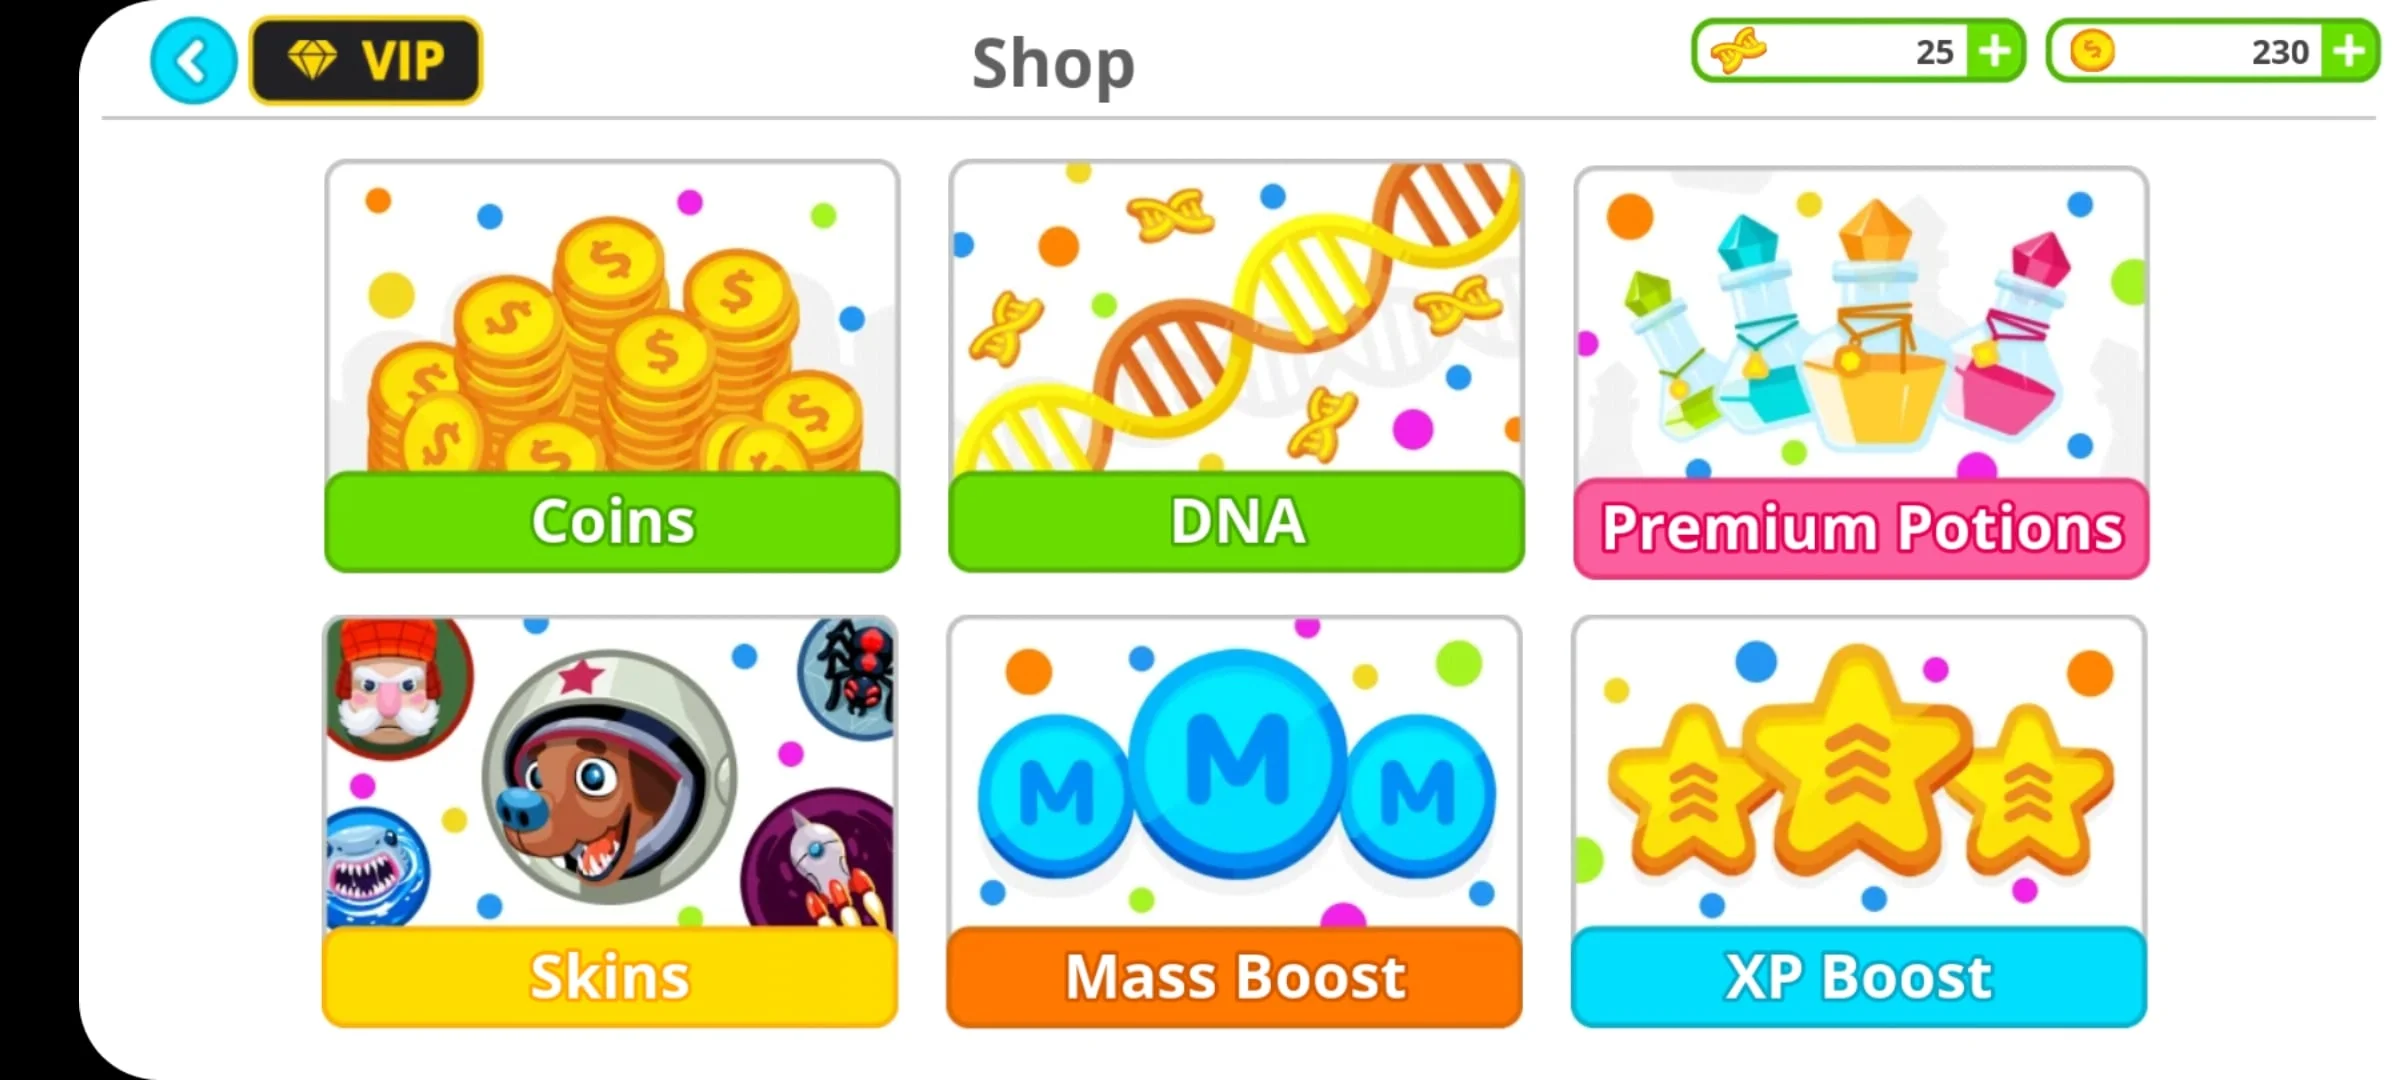 Guide: Agario cheats and Skins APK + Mod for Android.